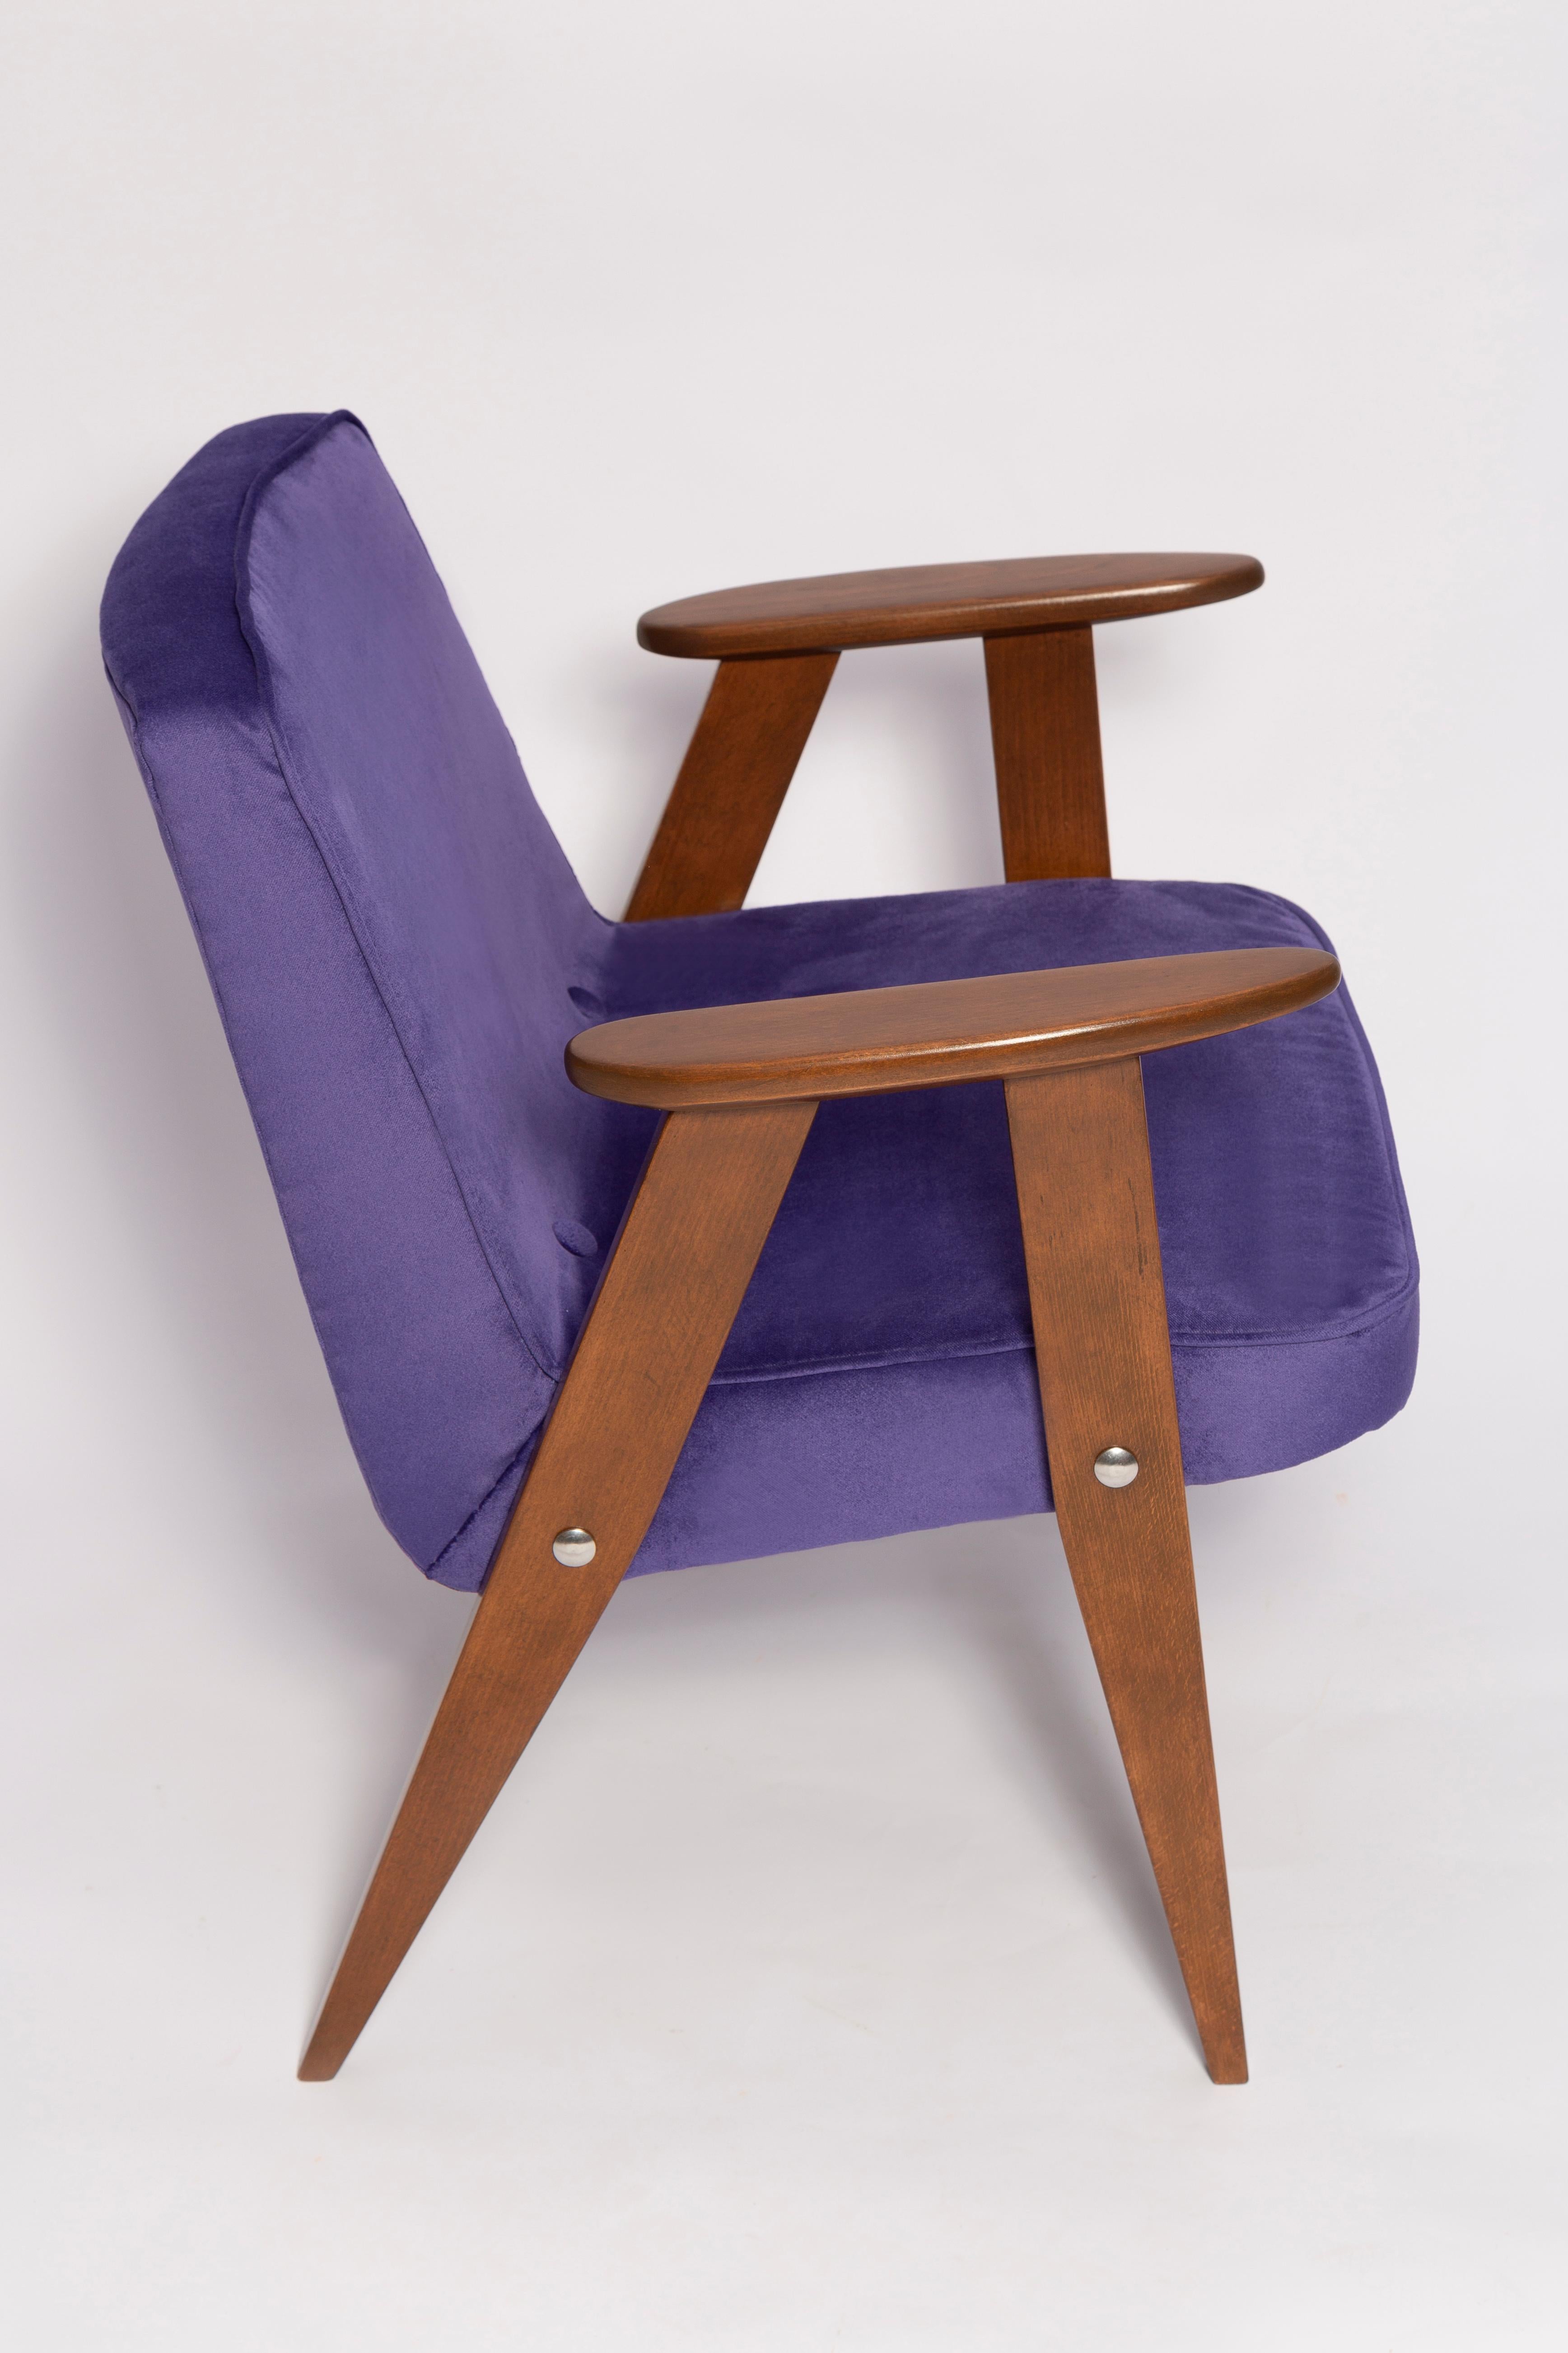 20th Century Pair of Mid-Century 366 Armchairs, Mint and Purple, by Chierowski, Europe, 1960s For Sale